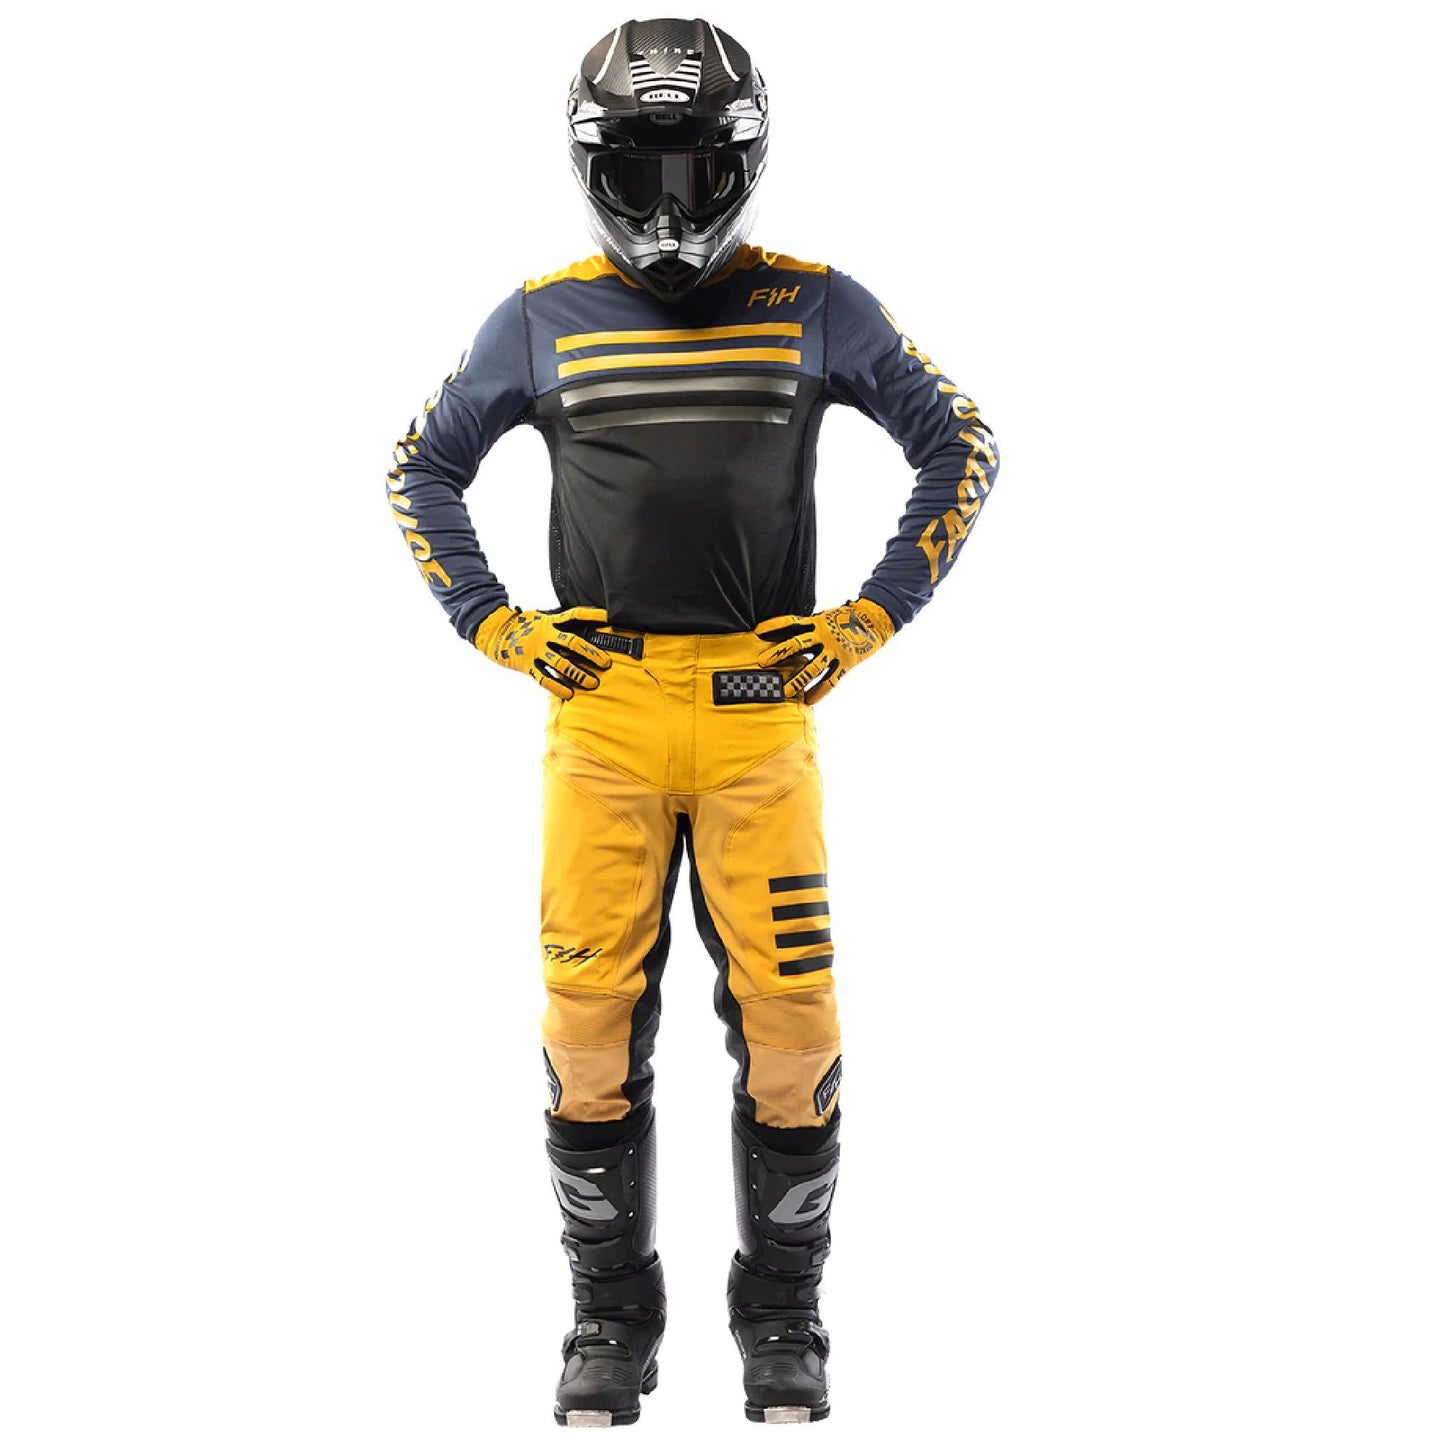 Fasthouse Speed Style Tempo Pant Vintage Gold Bike Pants